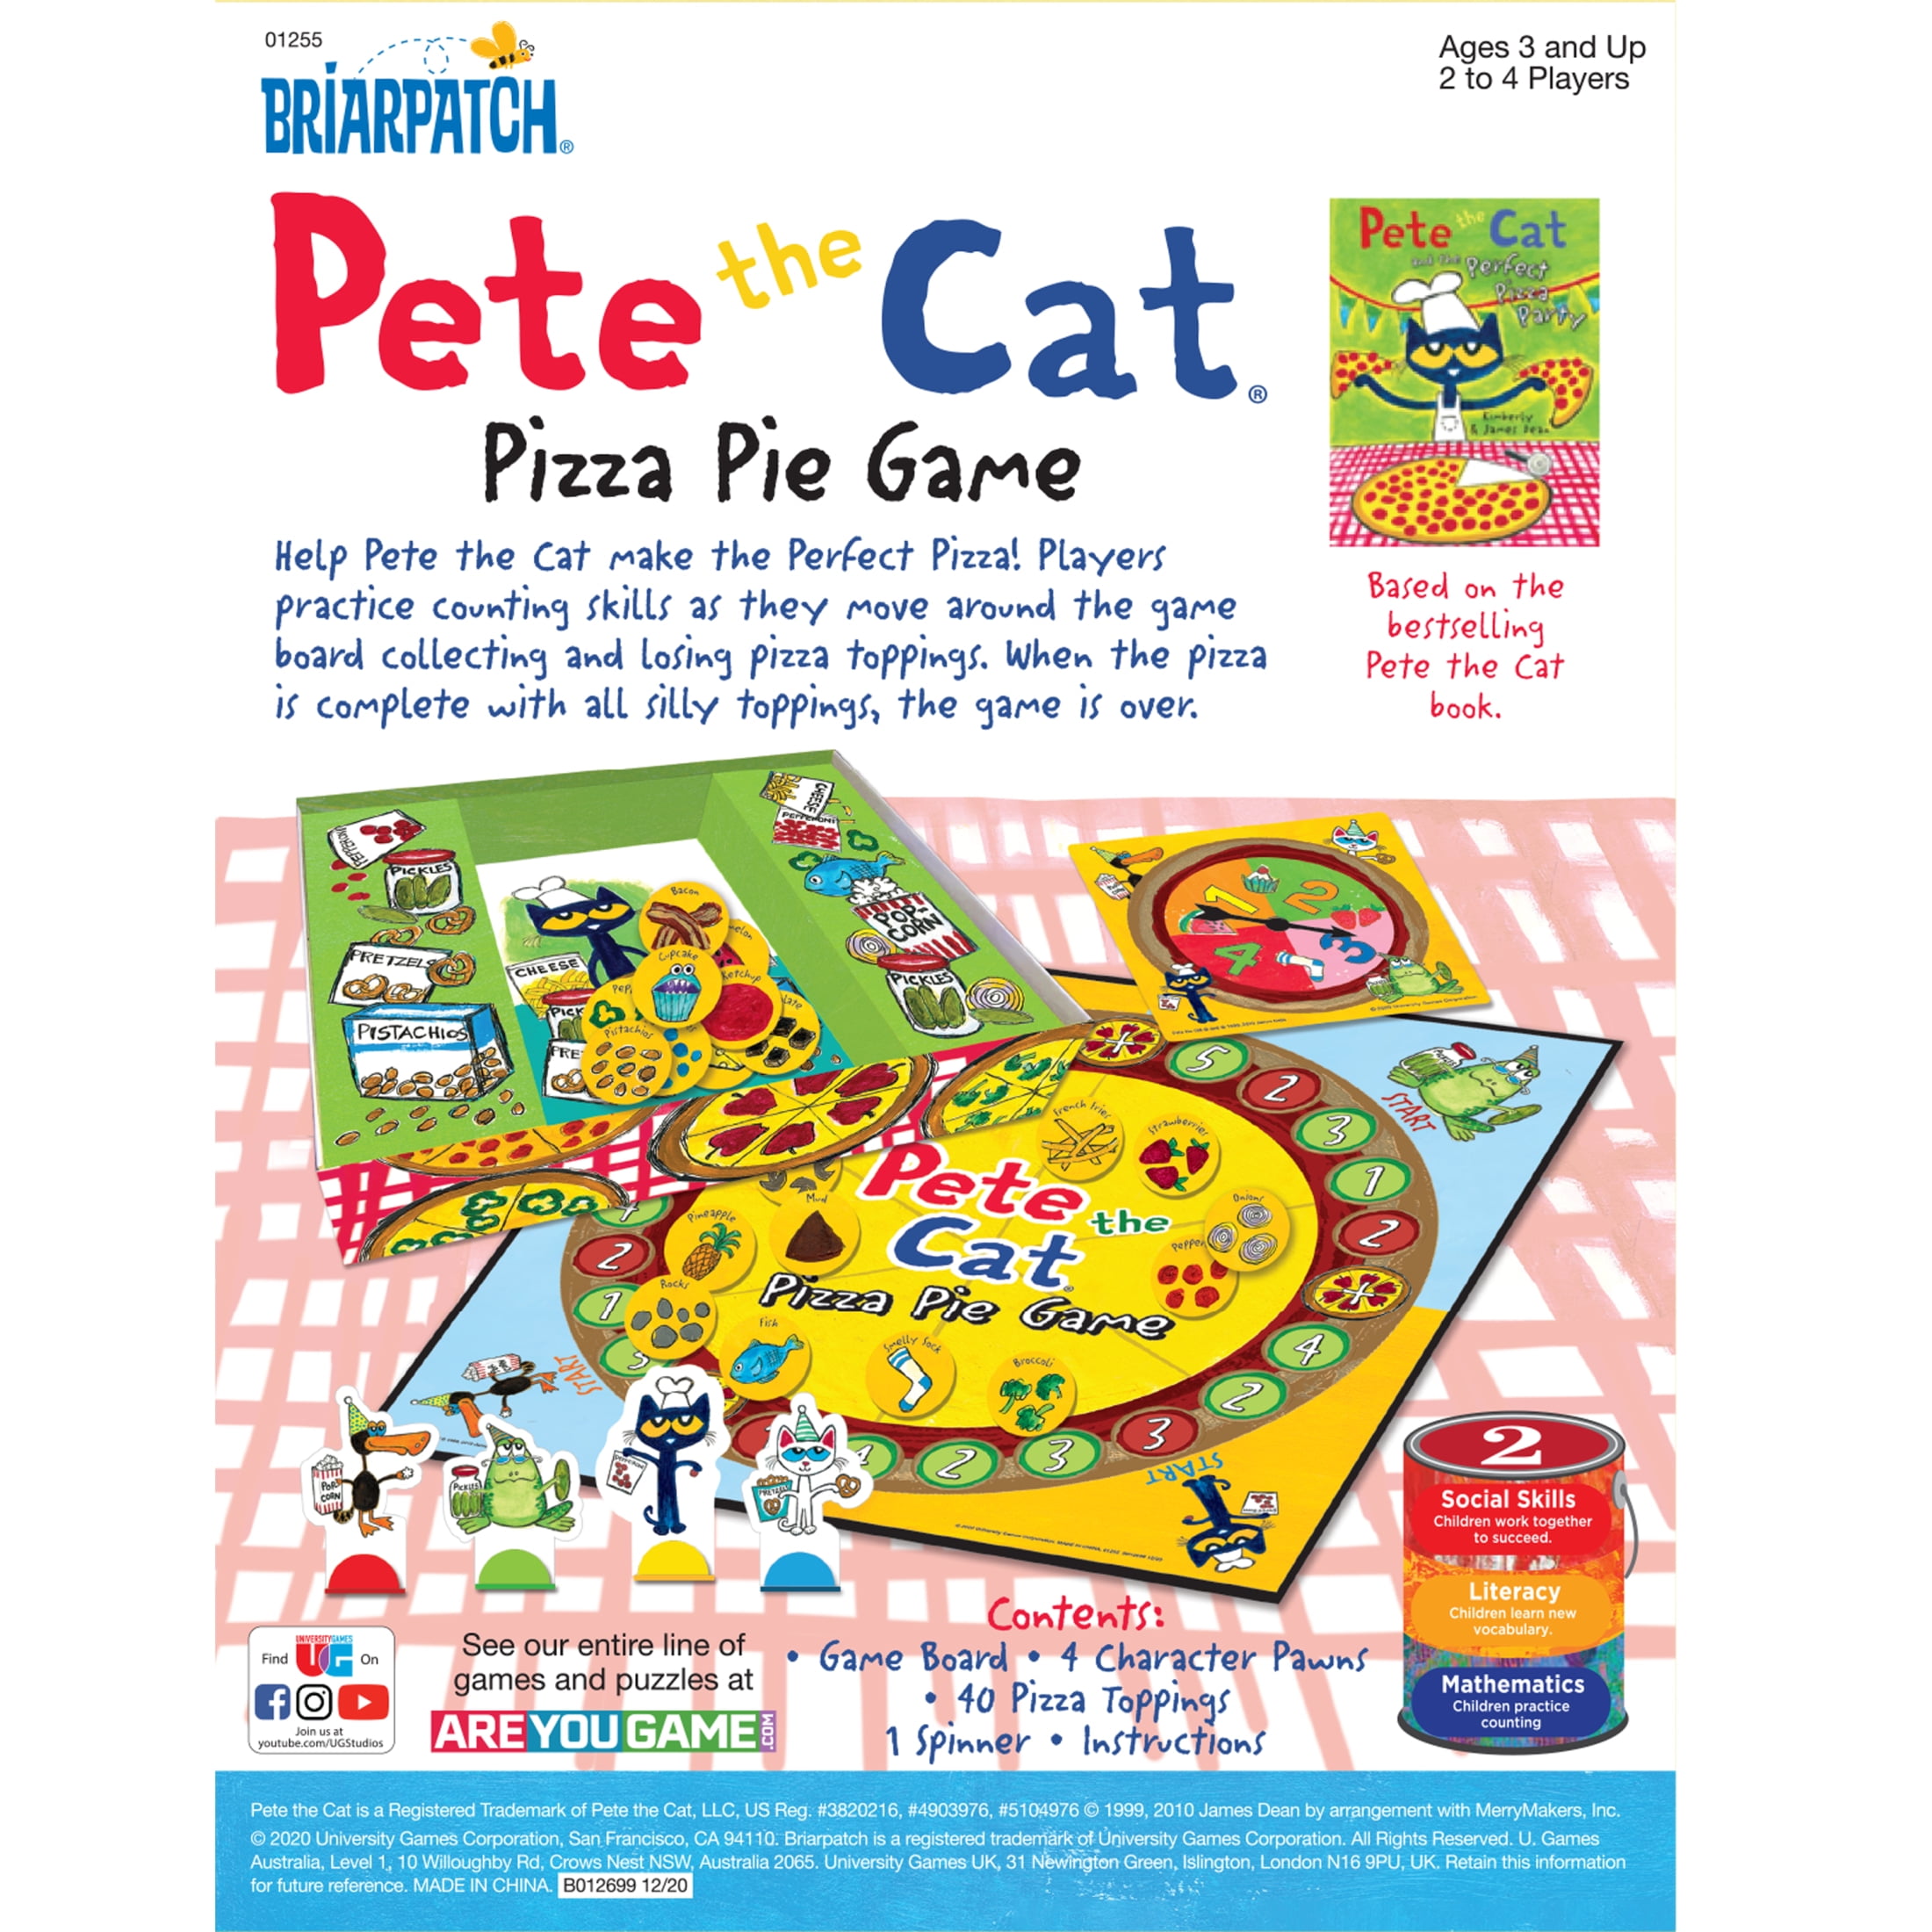 How to Play: Pete the Cat Pizza Pie Game